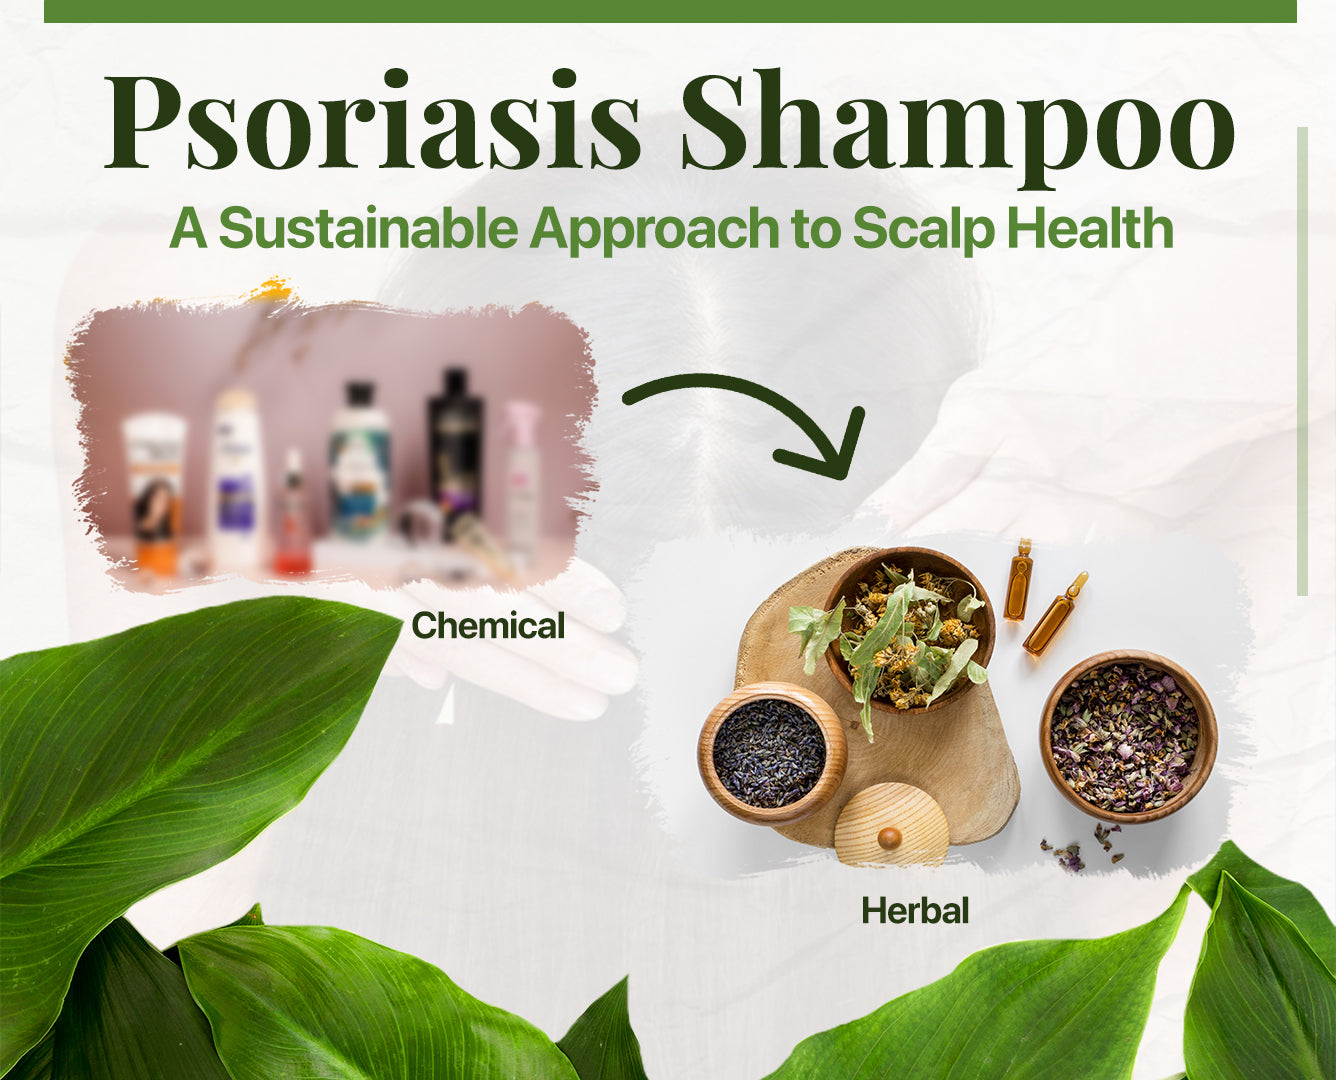 Psoriasis Shampoo: A Sustainable Approach to Scalp Health